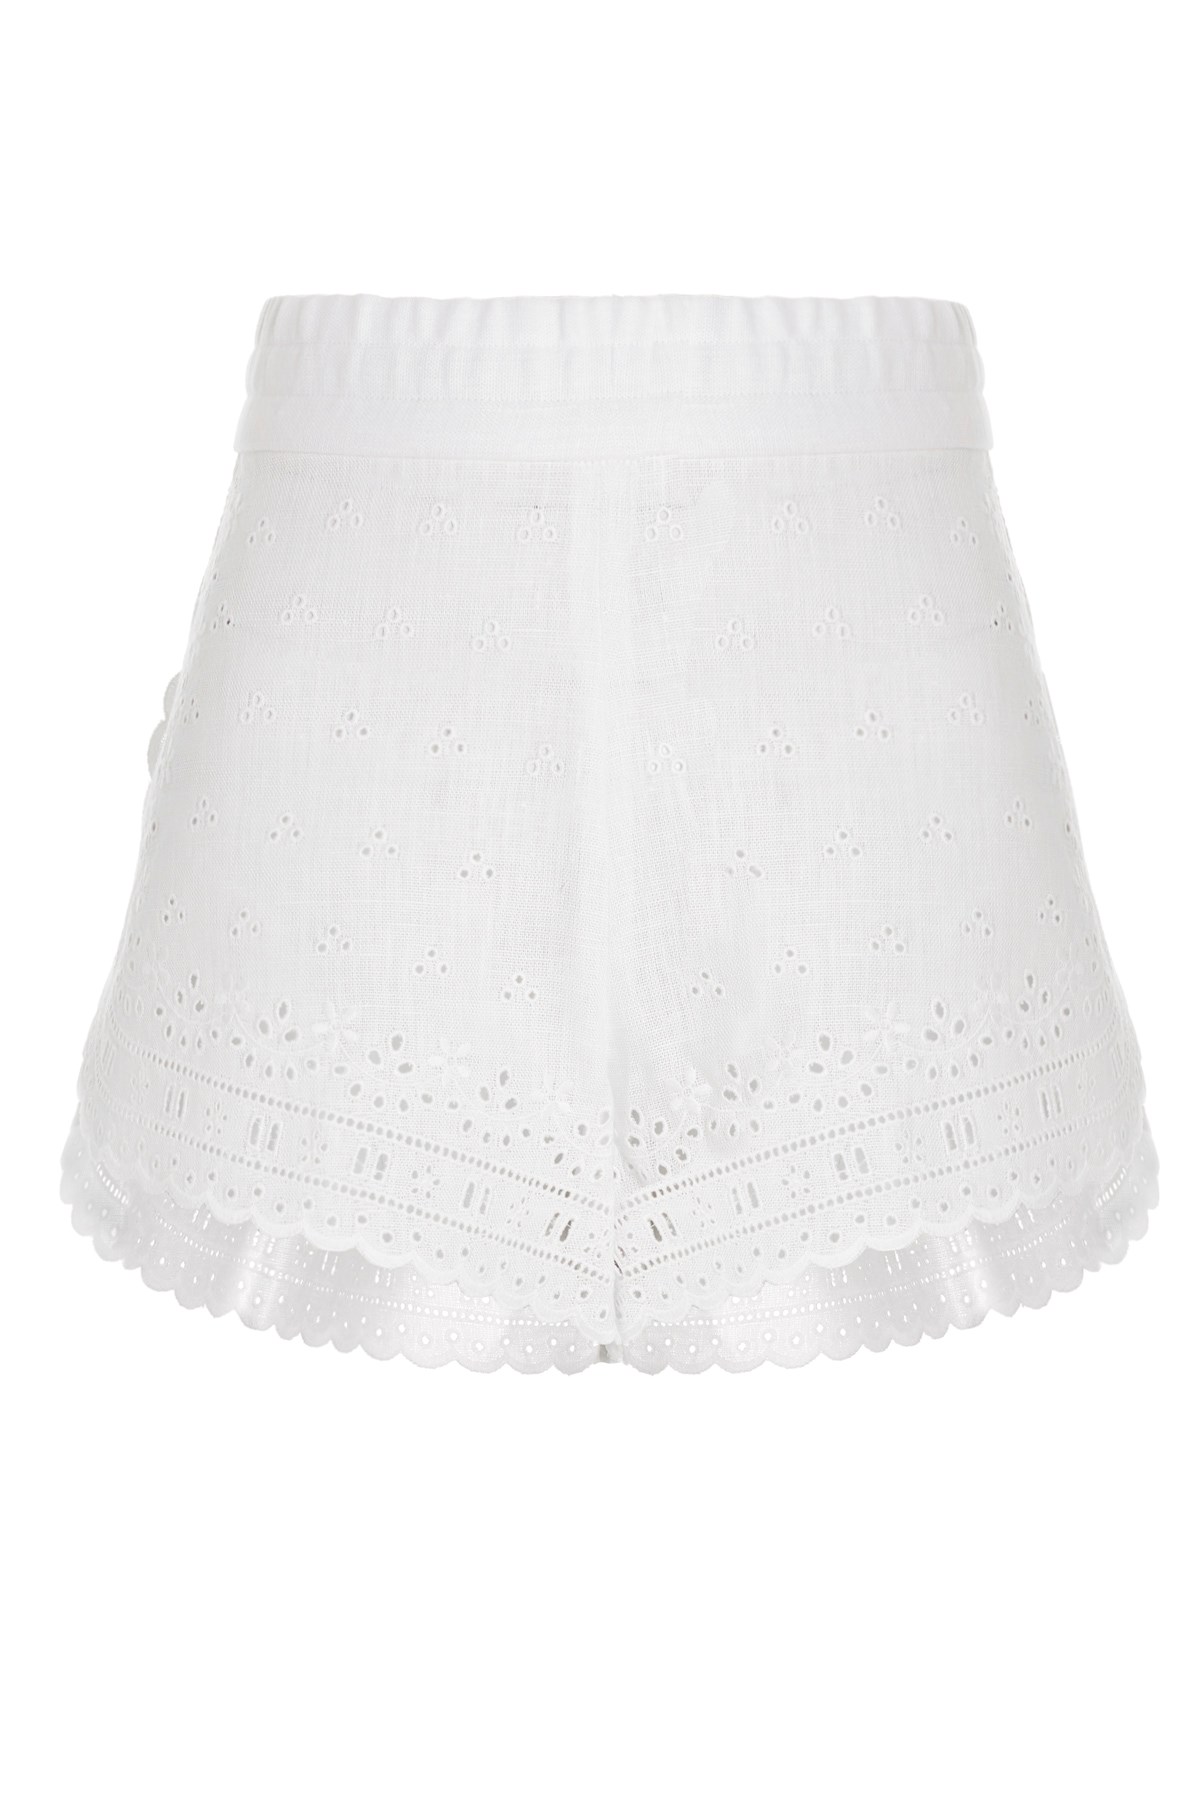 DOLCE & GABBANA Broderie Anglaise Shorts